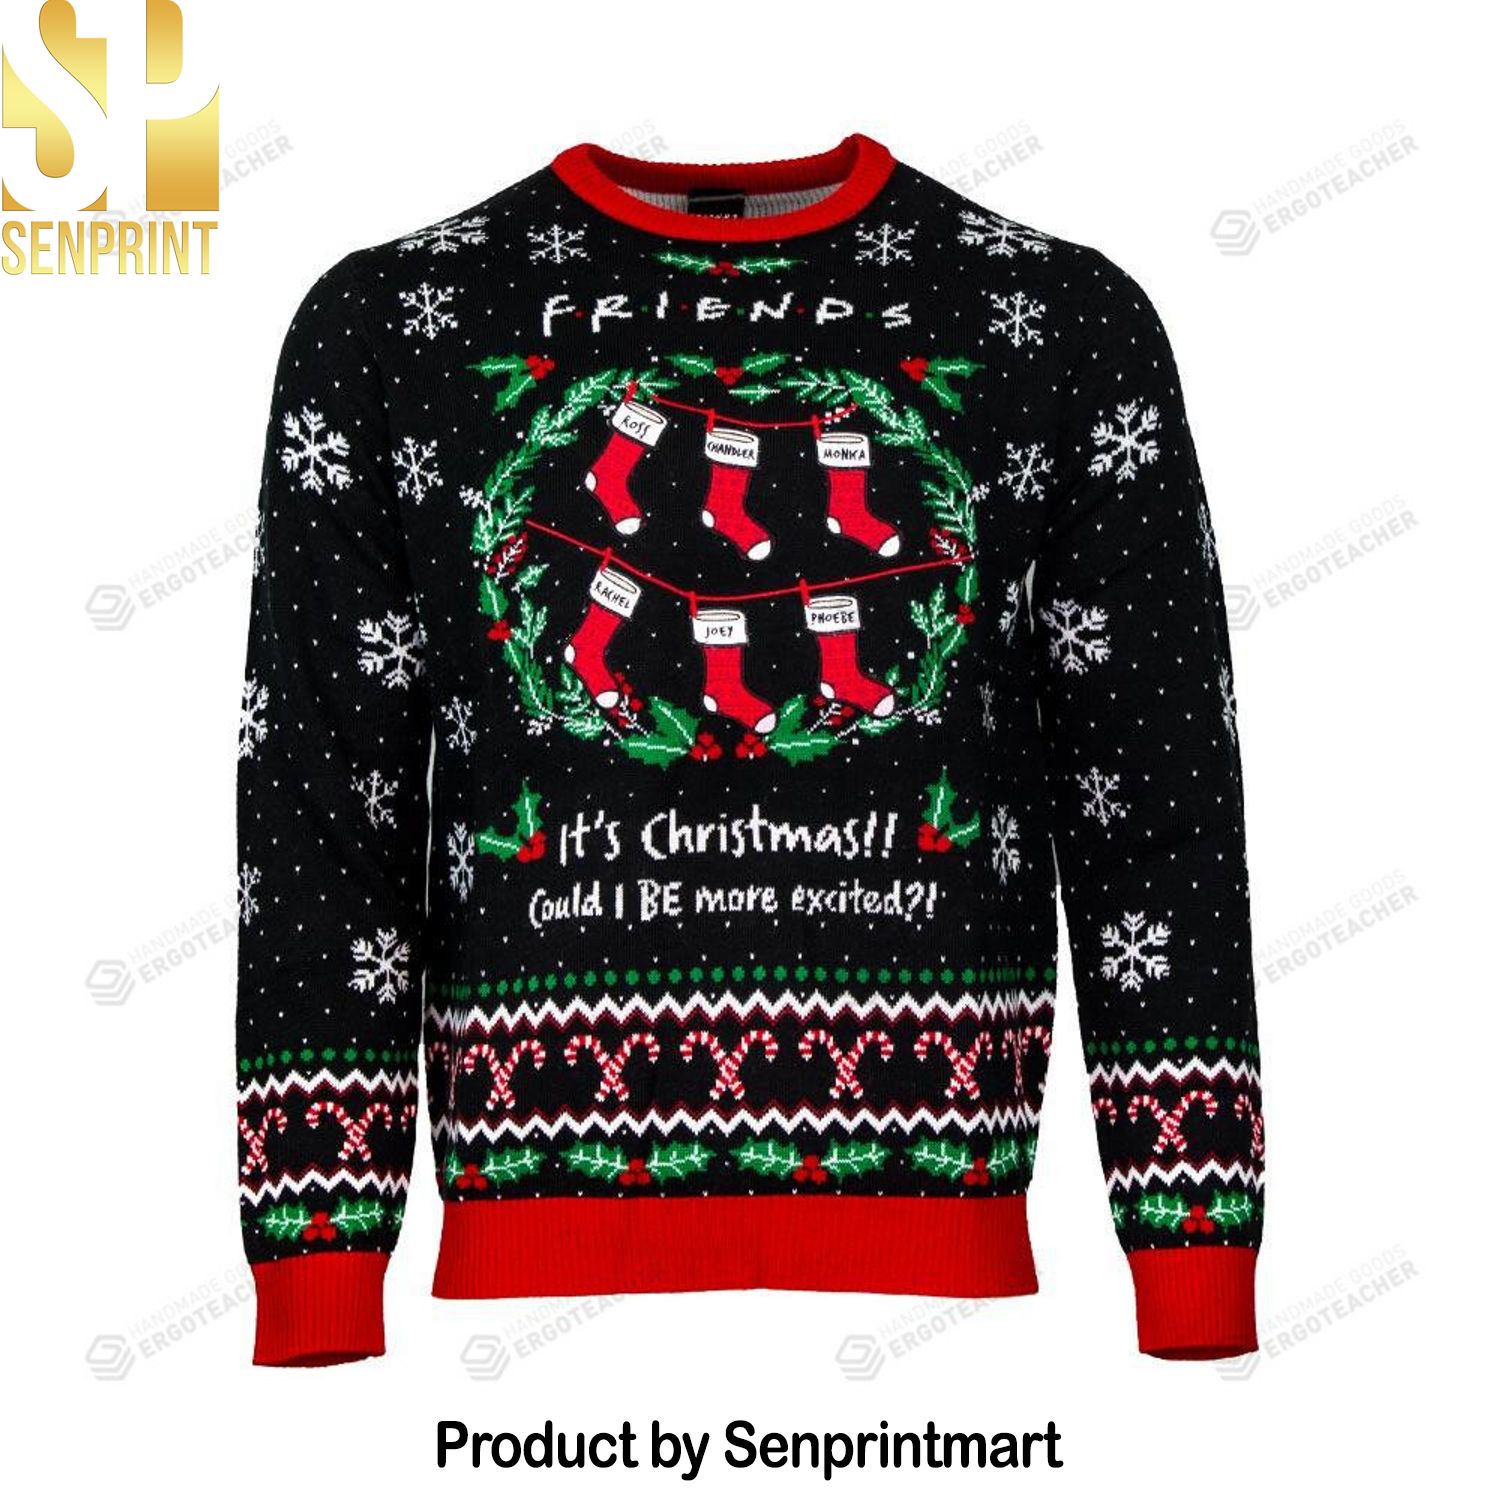 Friends Could I Be More Excited Ugly Xmas Wool Knitted Sweater